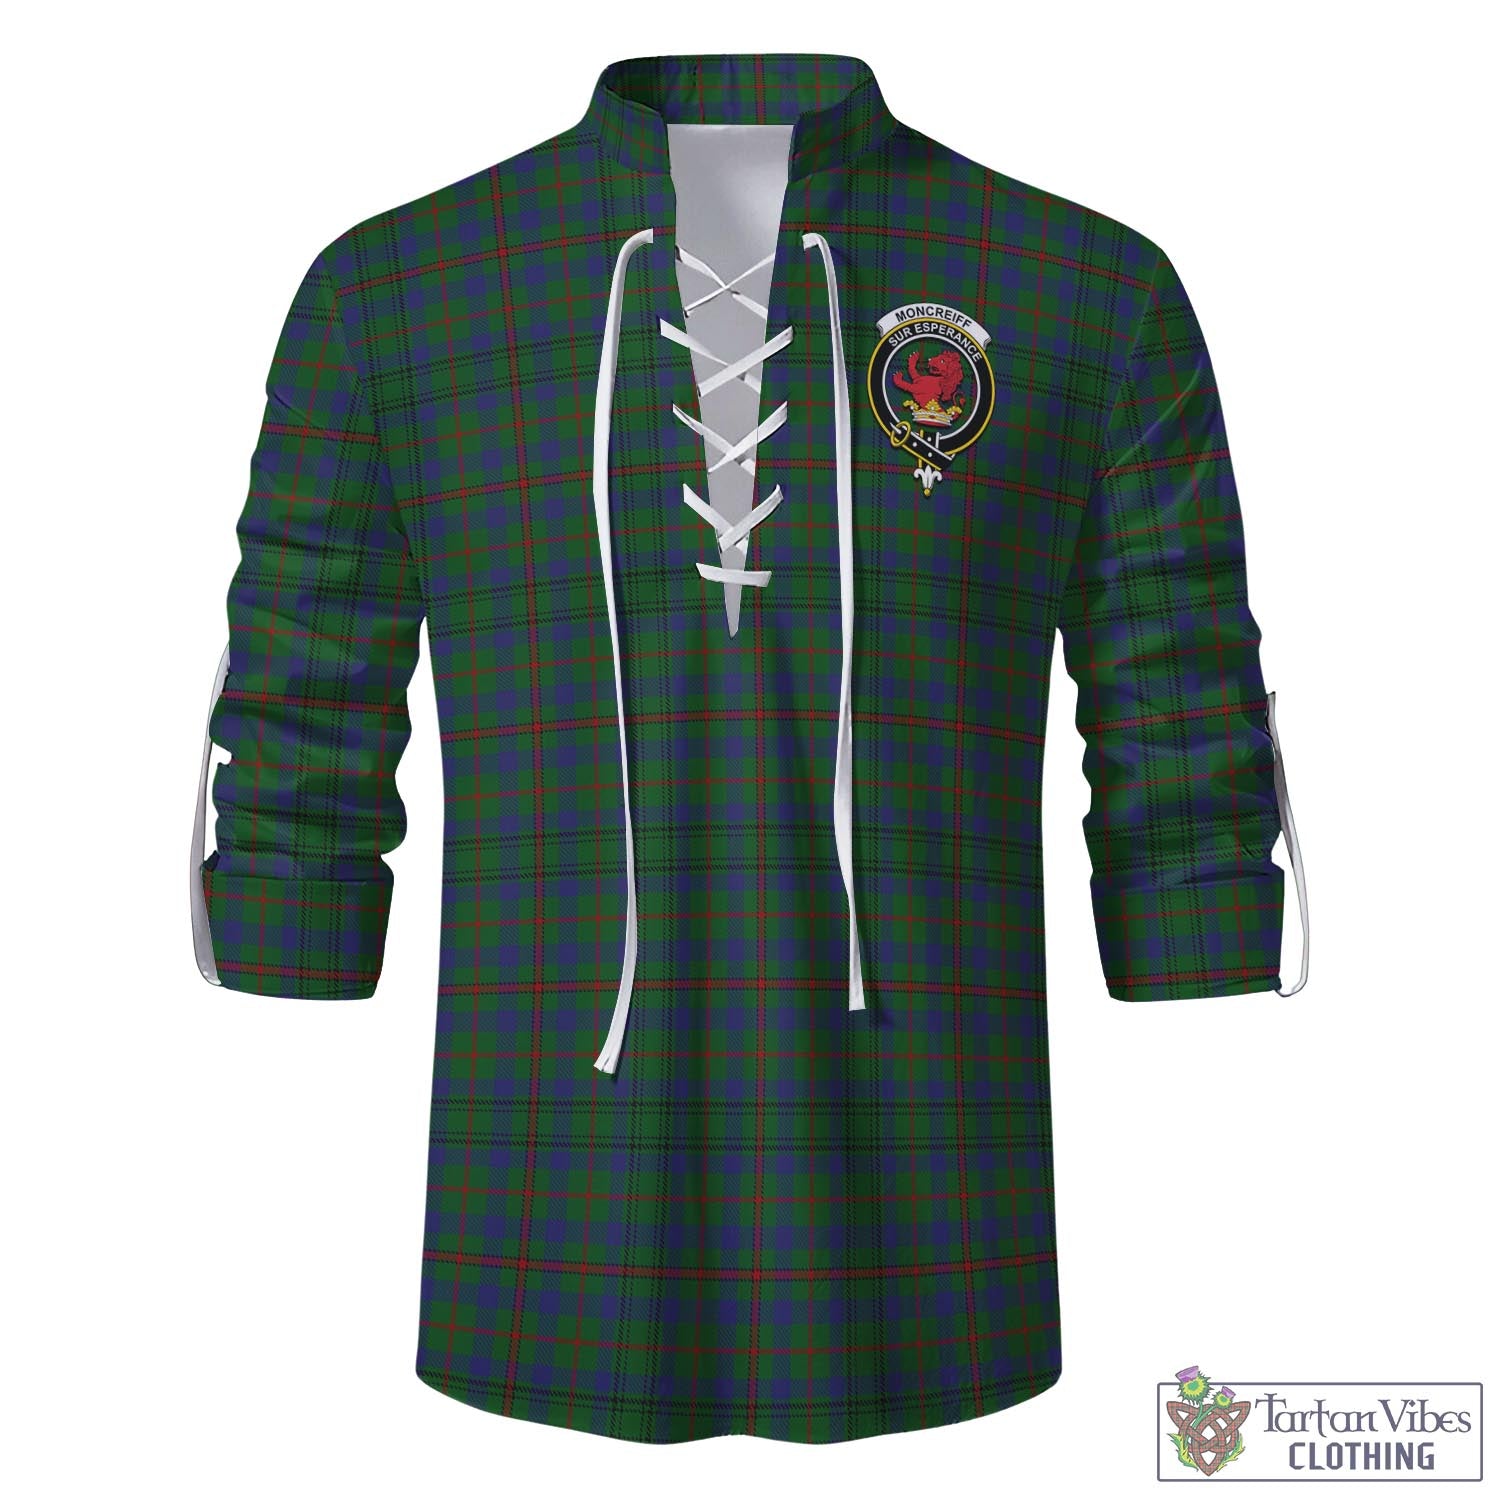 Tartan Vibes Clothing Moncrieff of Atholl Tartan Men's Scottish Traditional Jacobite Ghillie Kilt Shirt with Family Crest